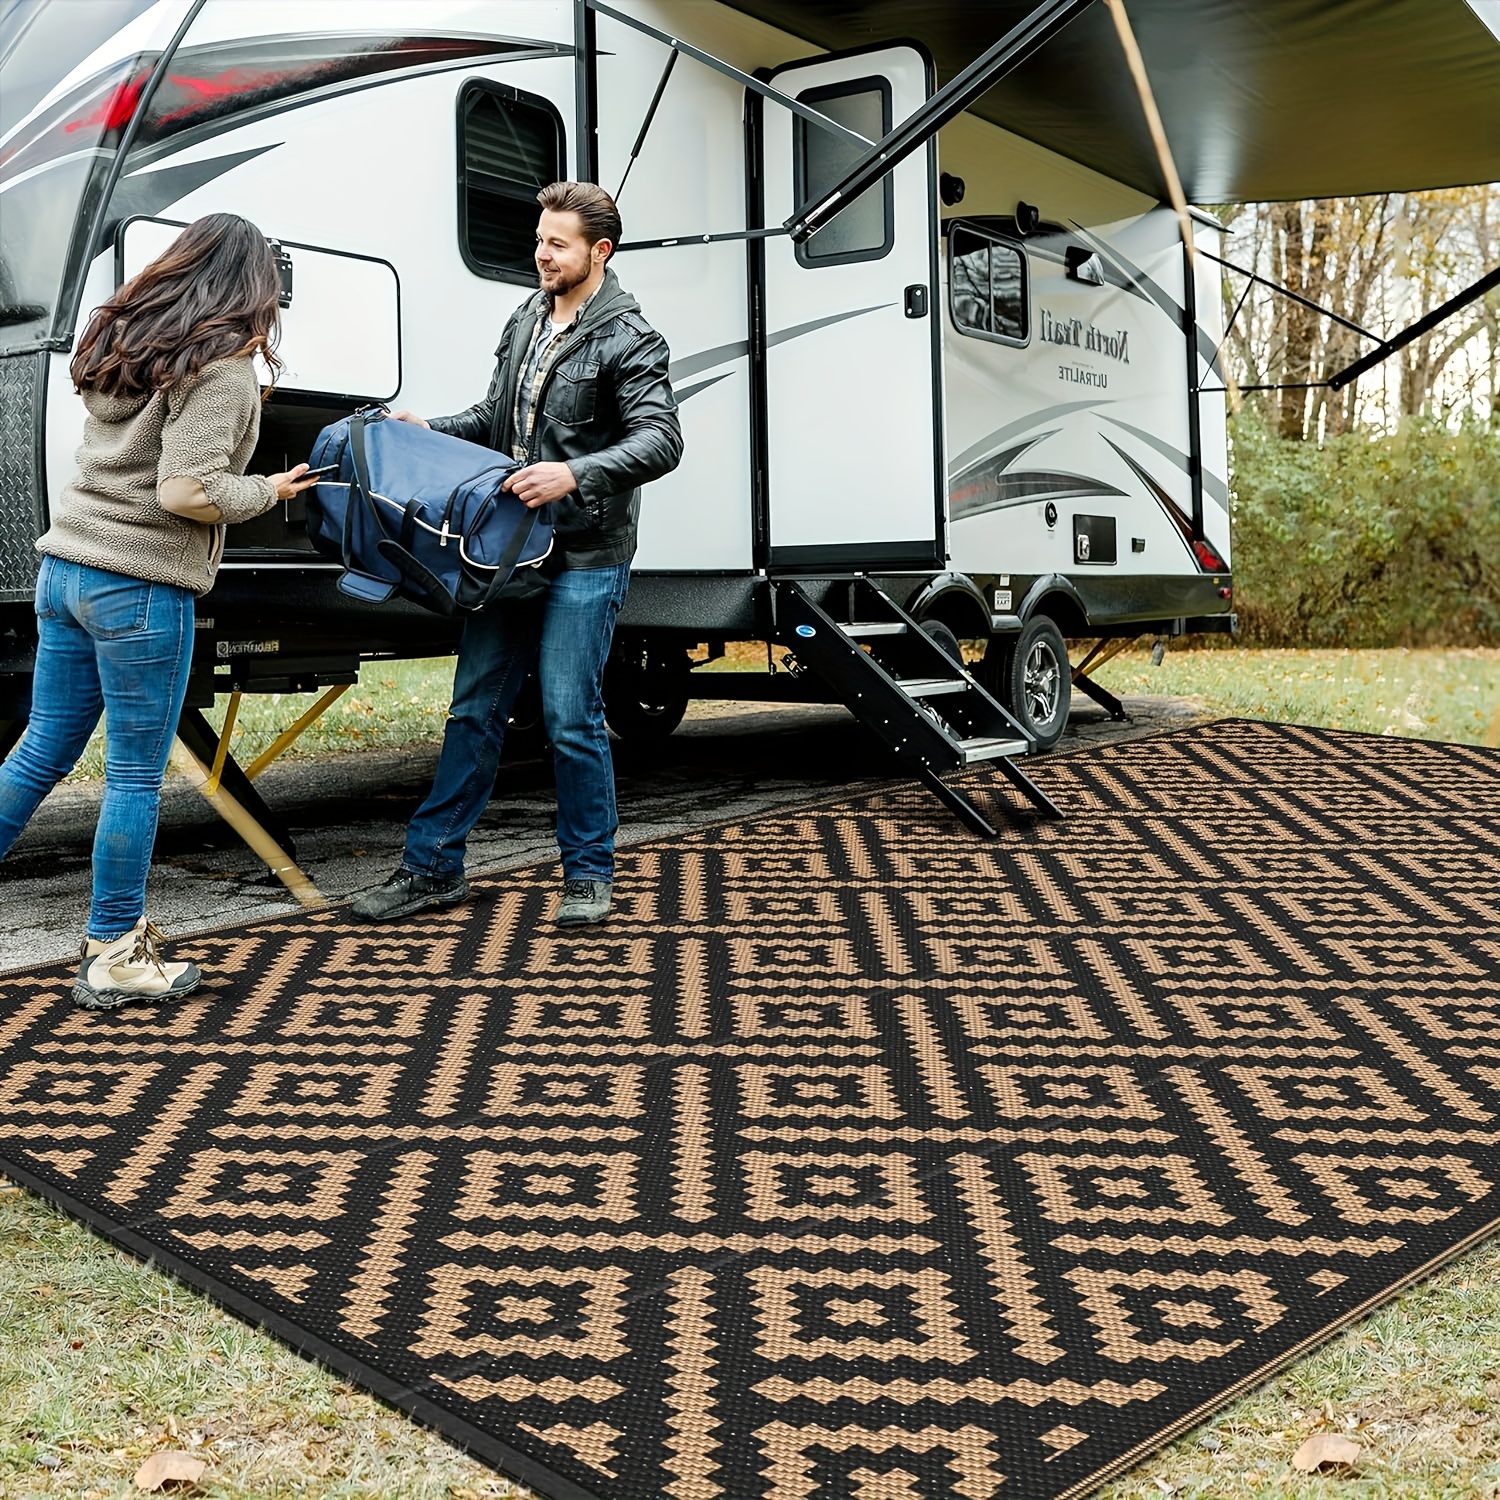 

Outdoor Rug For Patio Clearance, Waterproof Large Camping Mat, Reversible Plastic Straw Rugs For Rv, Camper, Balcony, Backyard, Picnic, Deck (black & Brown)